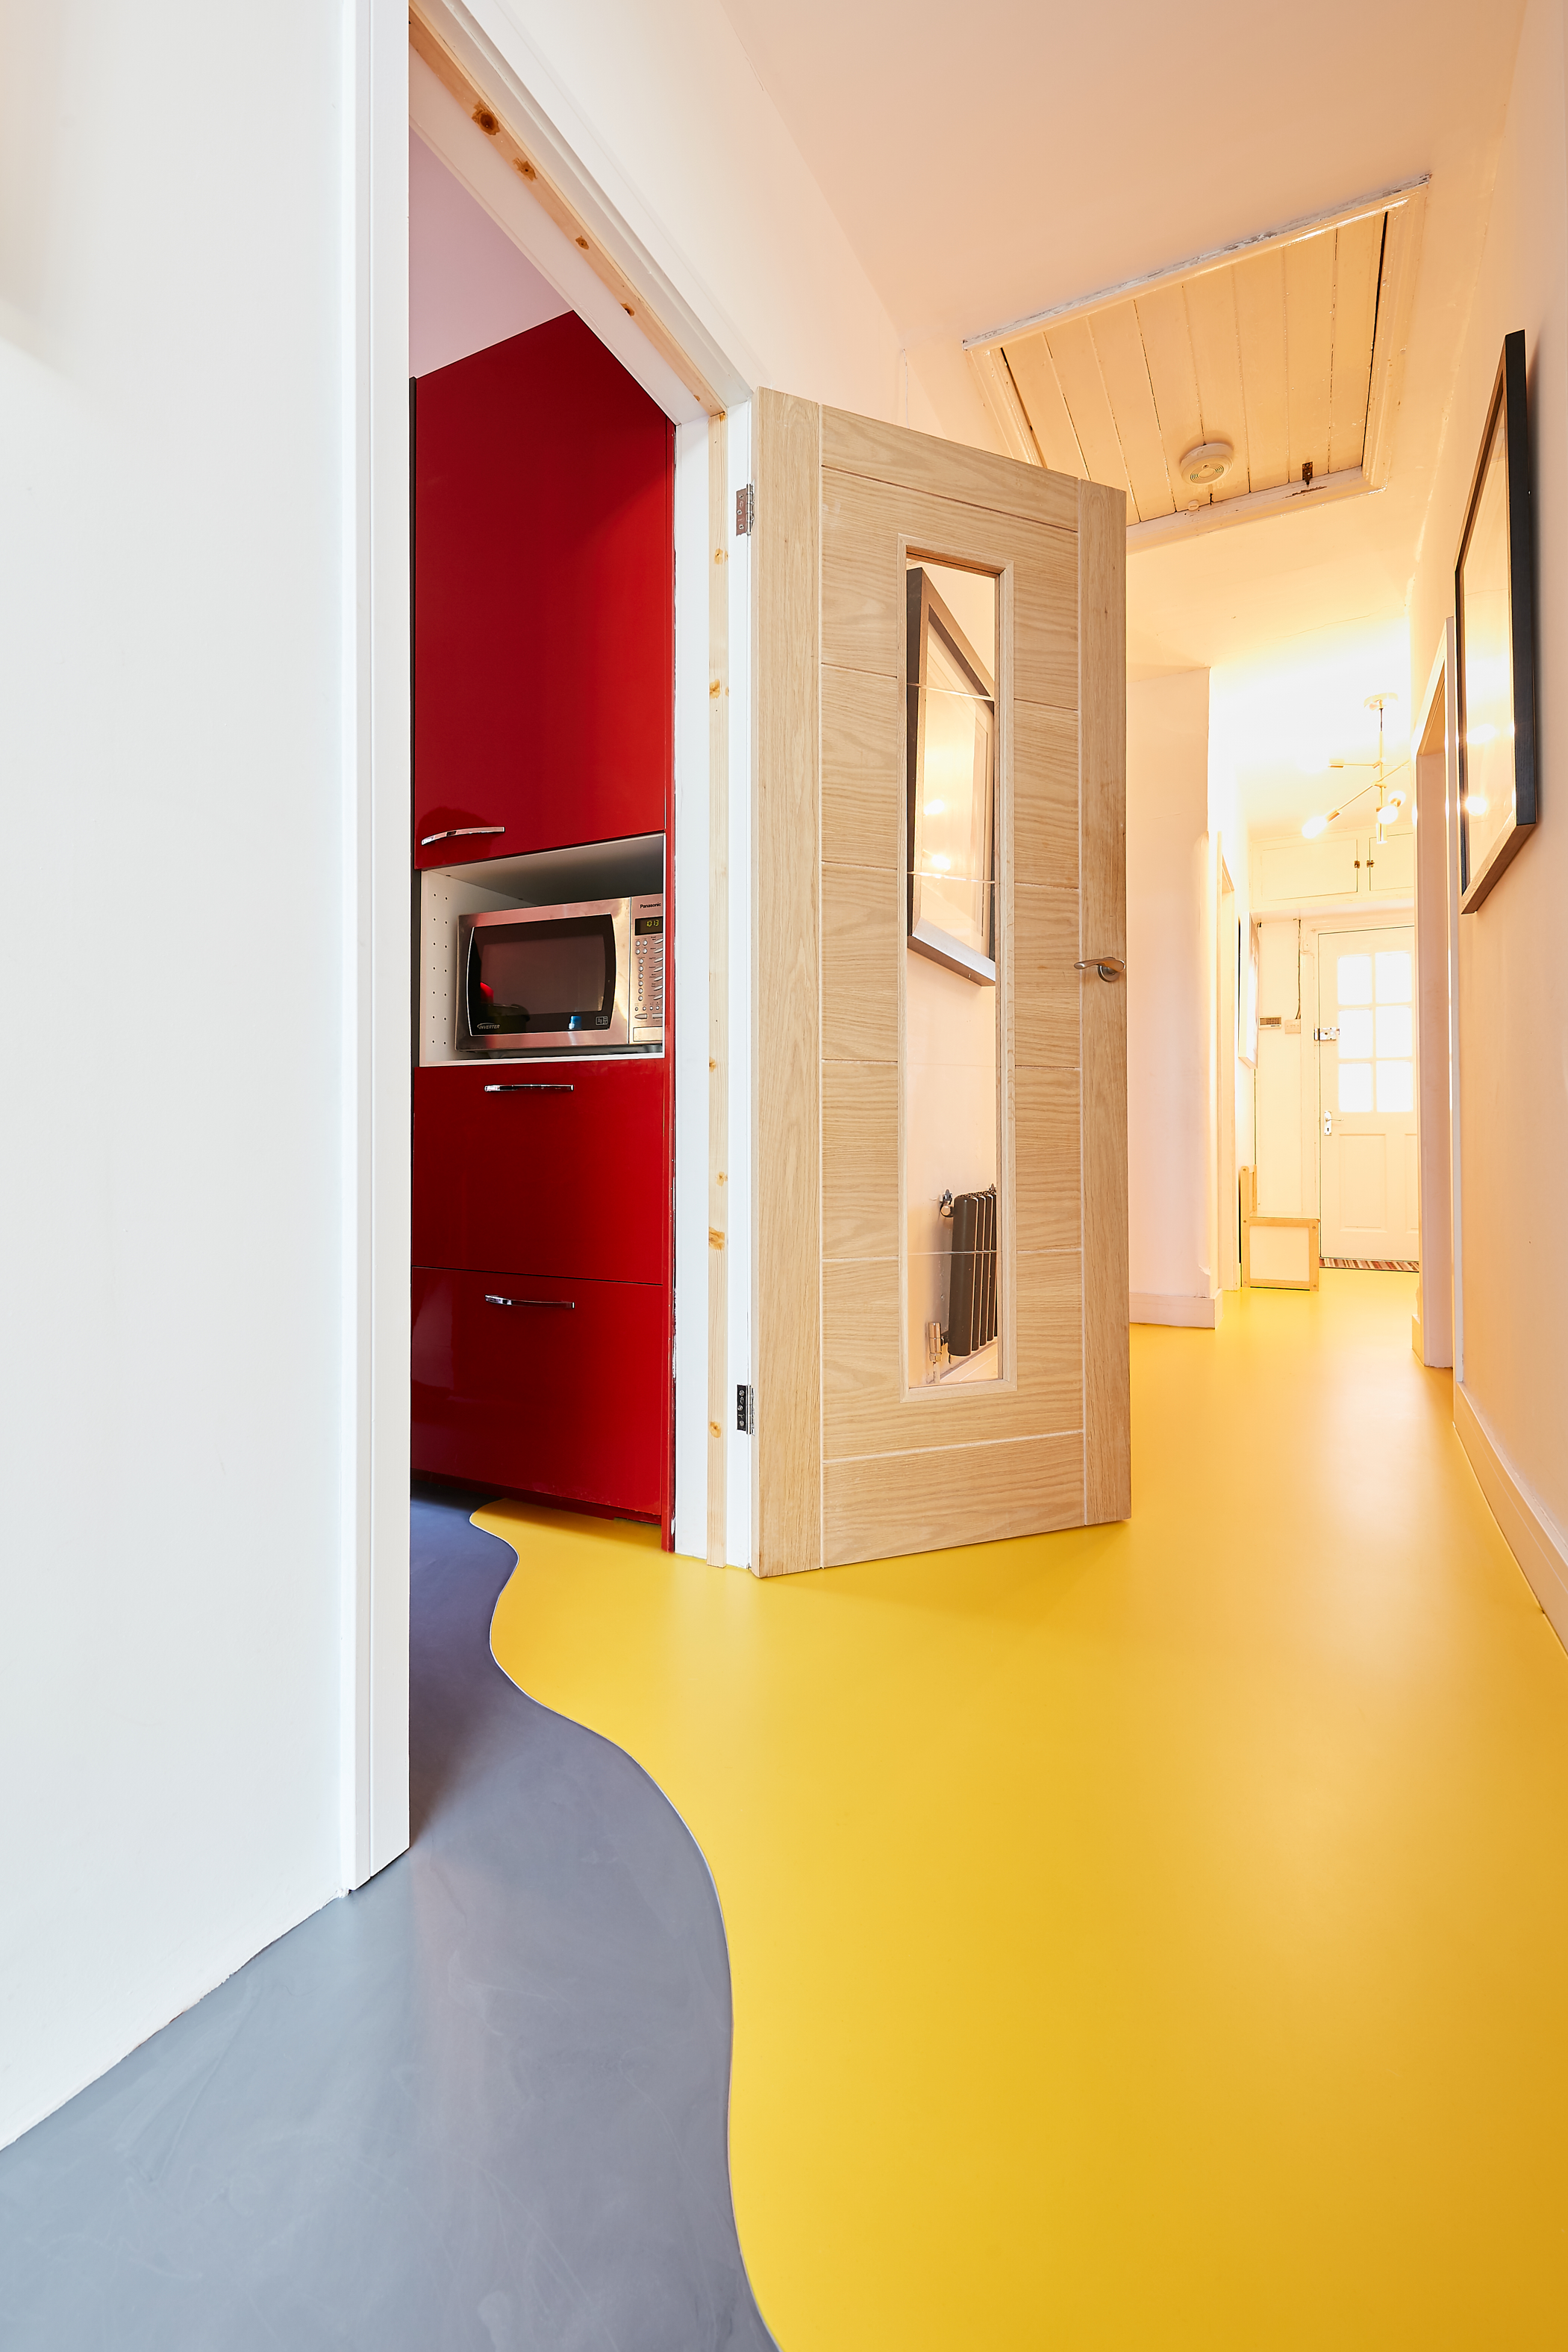 A LuxSphere resin floor in yellow and grey 